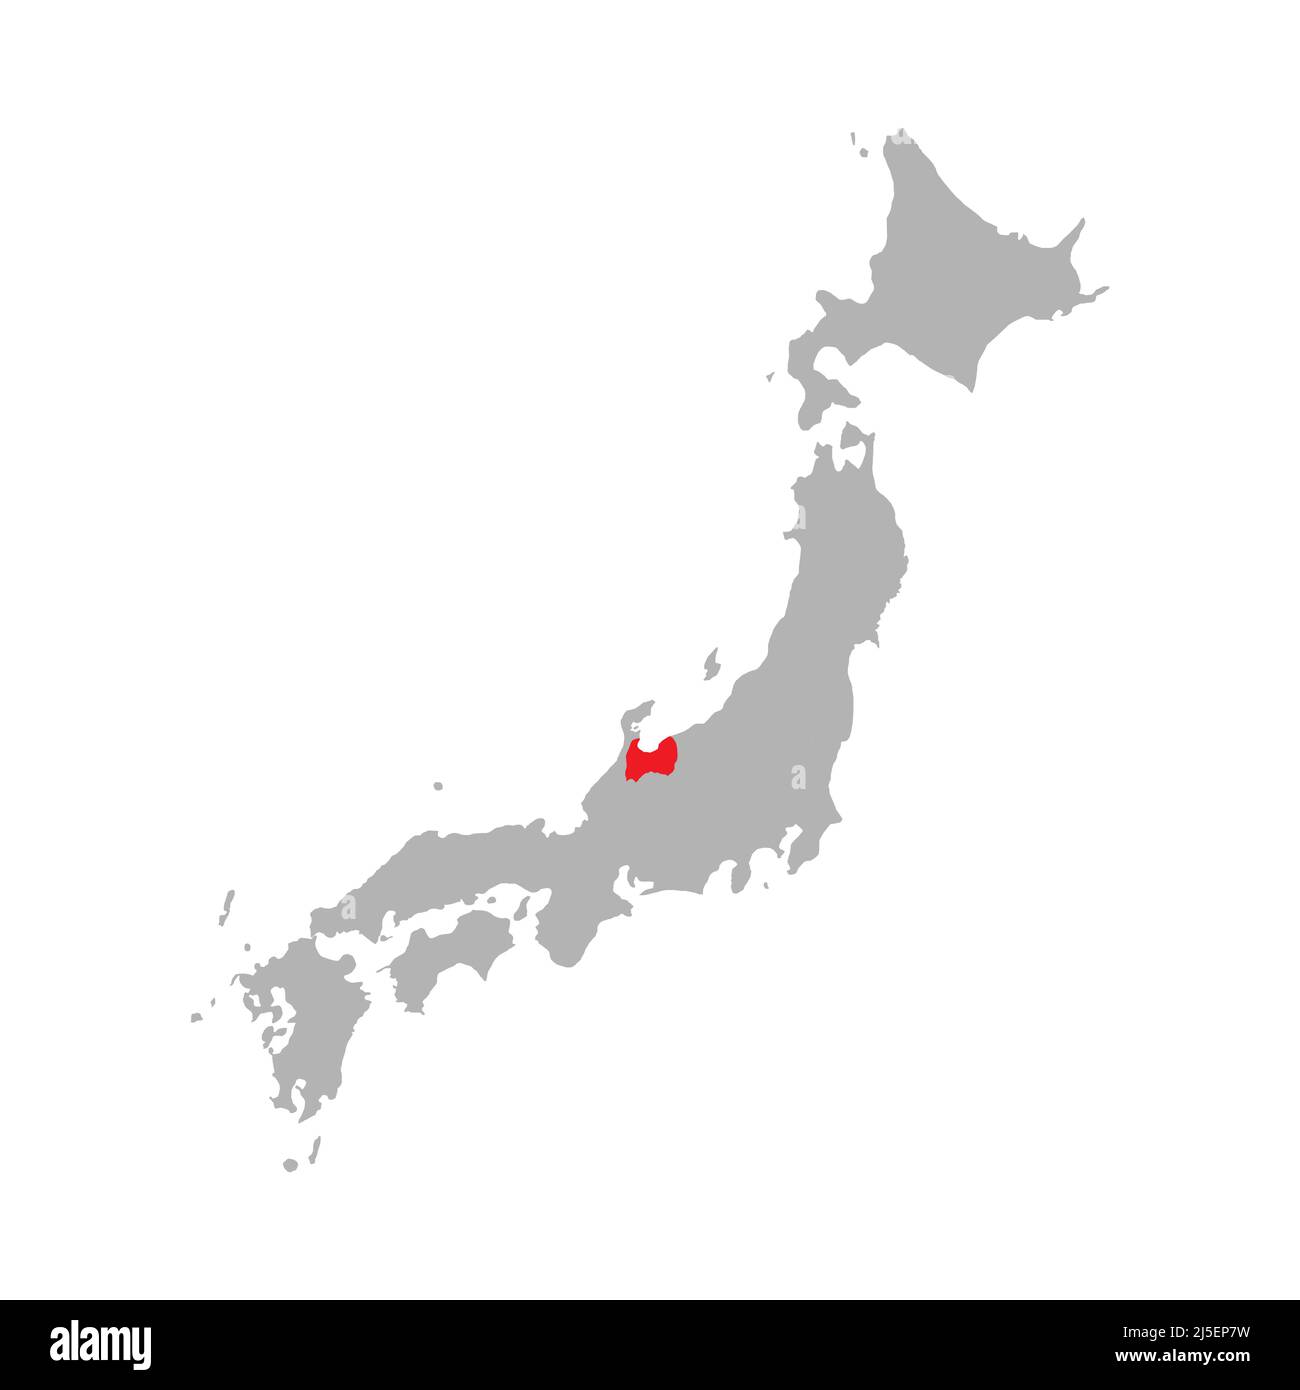 Toyama prefecture highlighted on the map of Japan Stock Vector